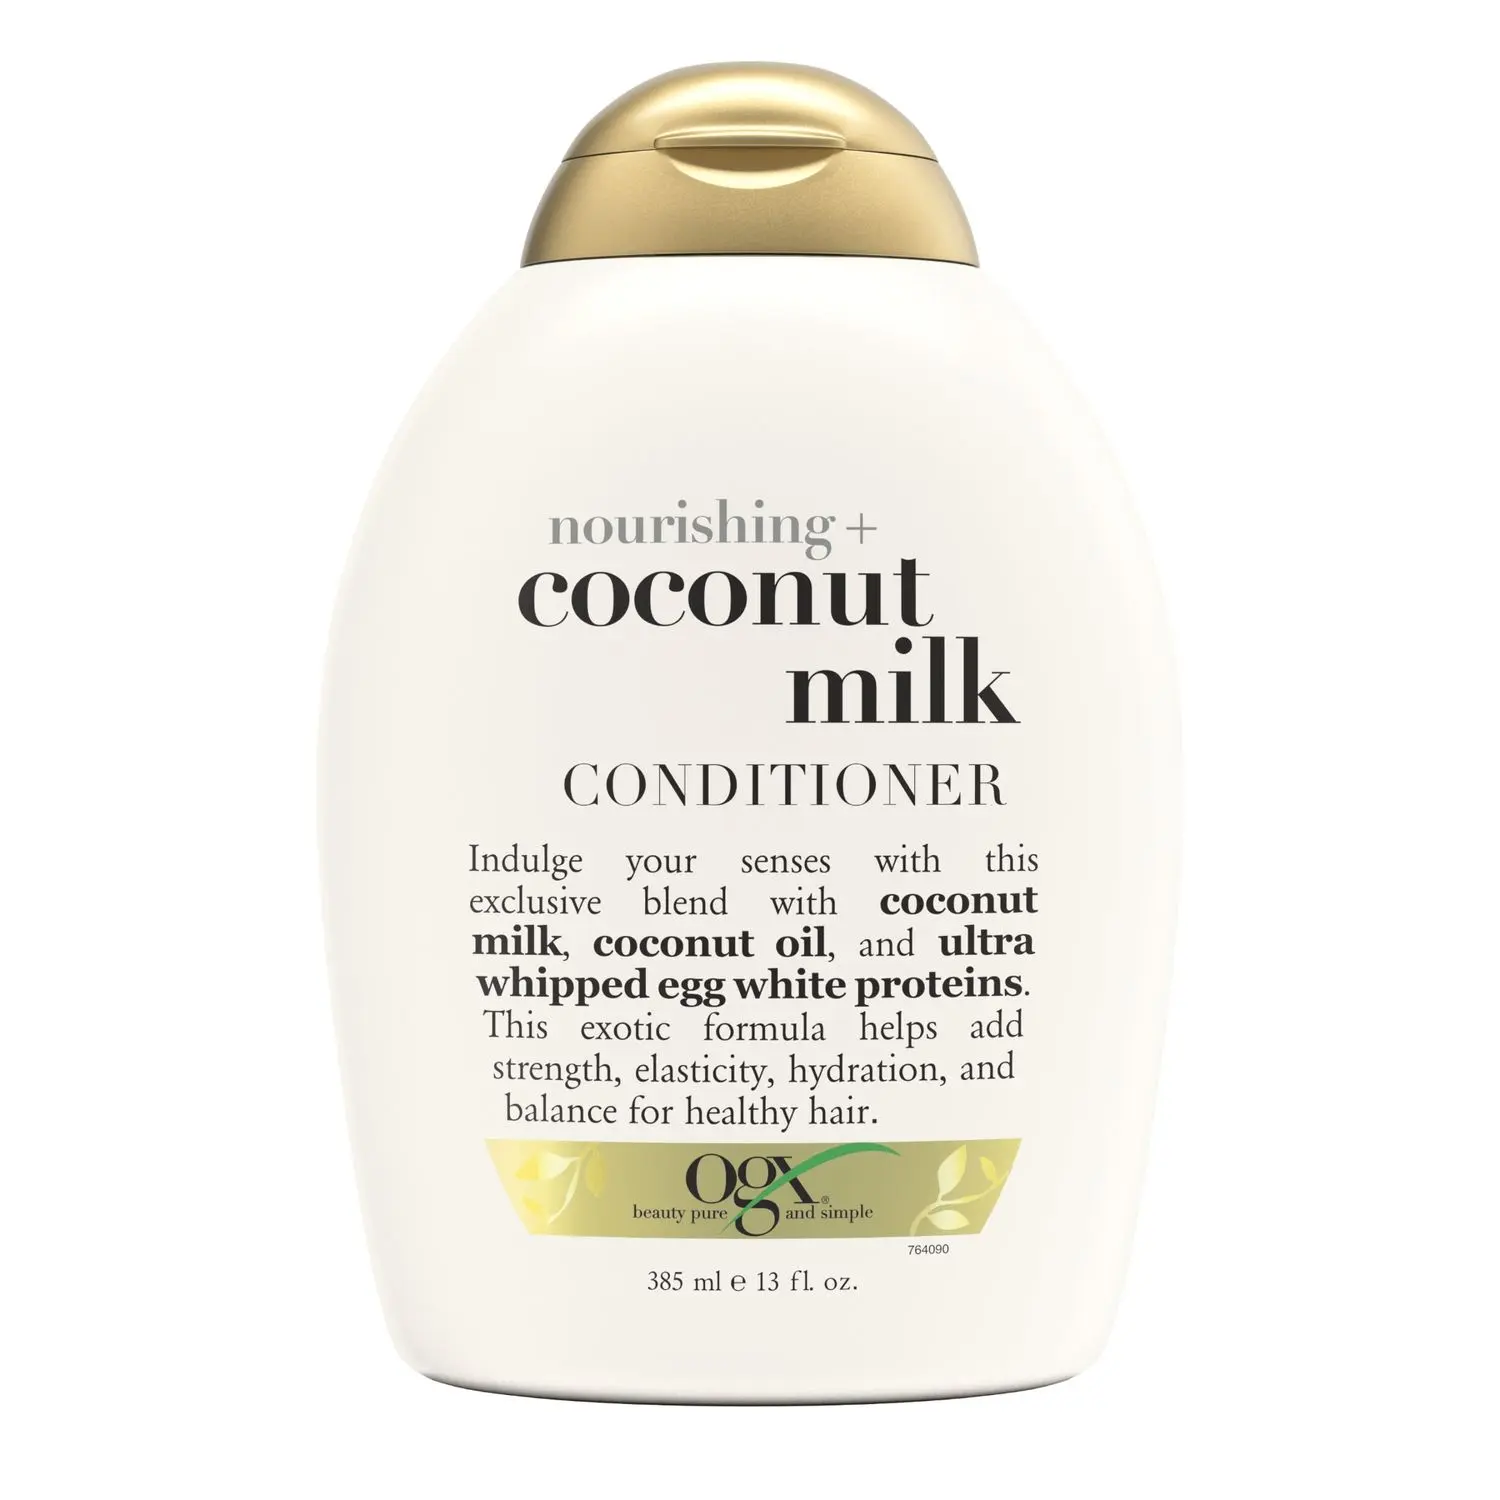 OGX Nourishing + Coconut Milk Moisturizing Conditioner for Strong & Healthy Hair, with Coconut Milk, Coconut Oil & Egg White Protein, Paraben-Free, Sulfate-Free Surfactants, 385ml